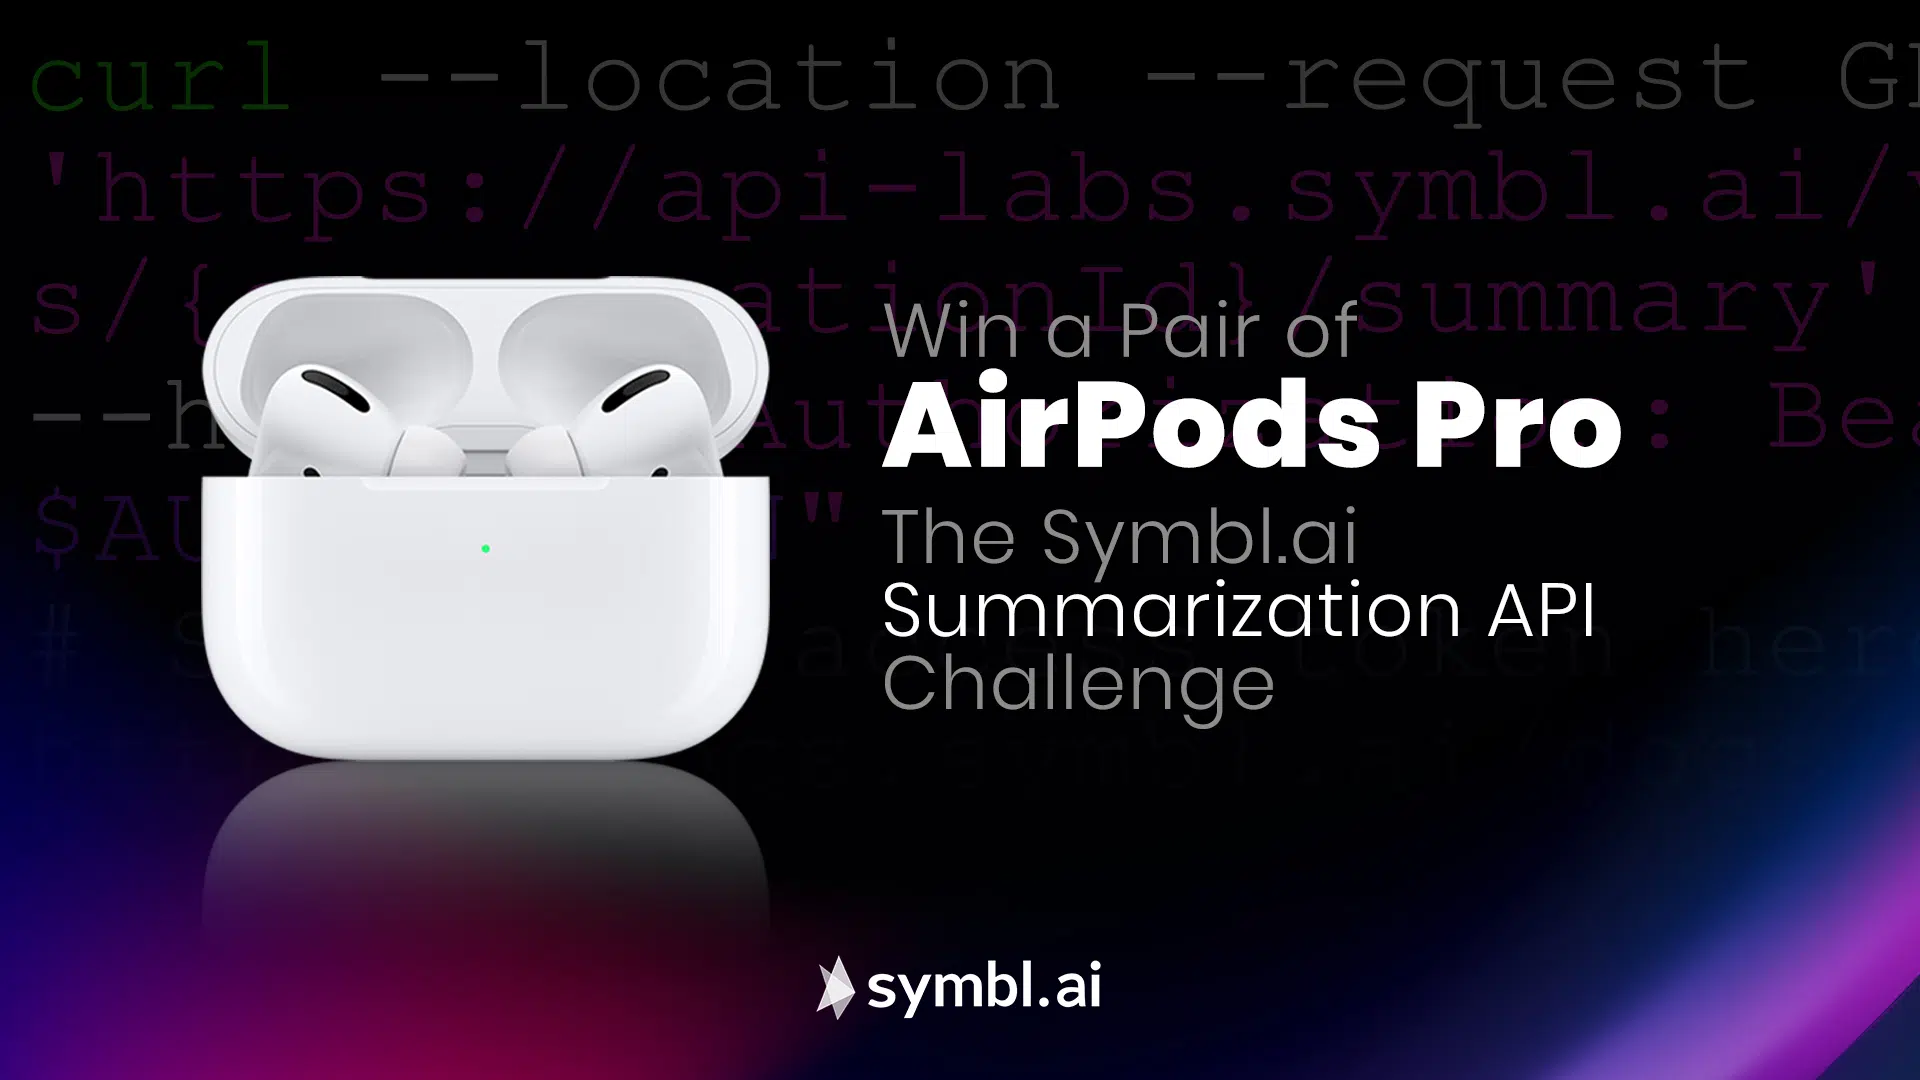 Win a Pair of AirPods Pro